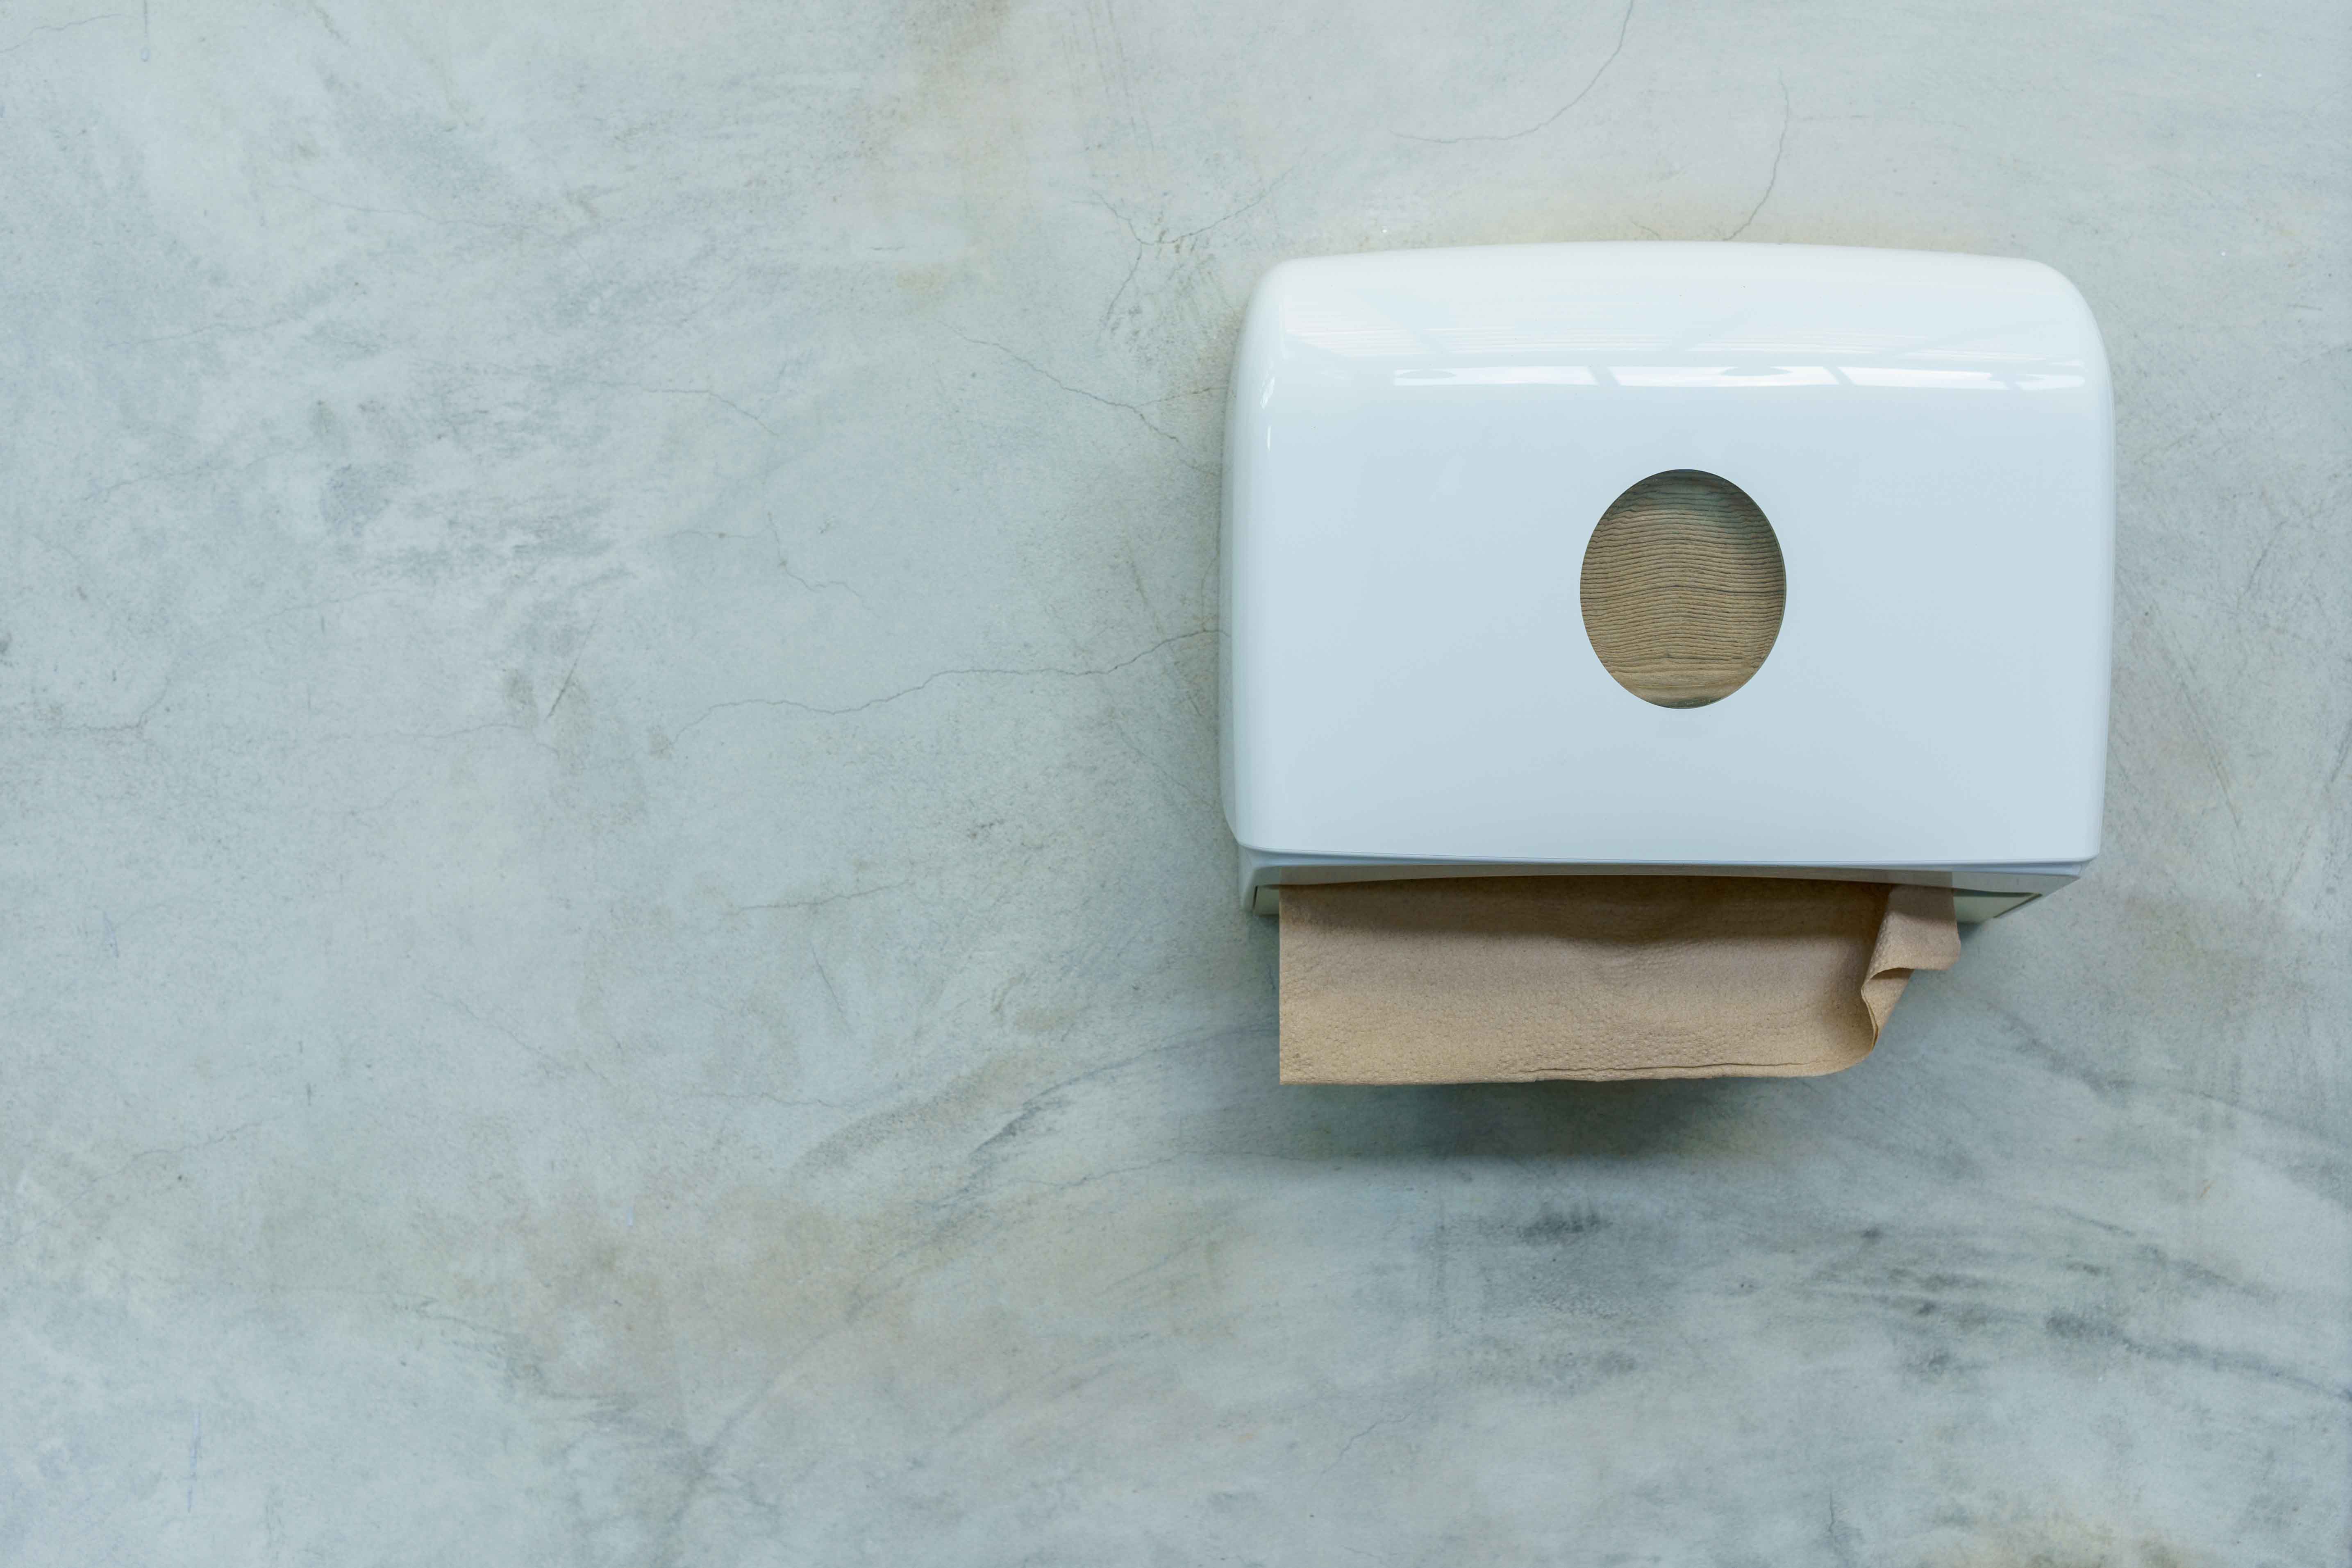 Why Paper Towels Are Better for Hand Drying